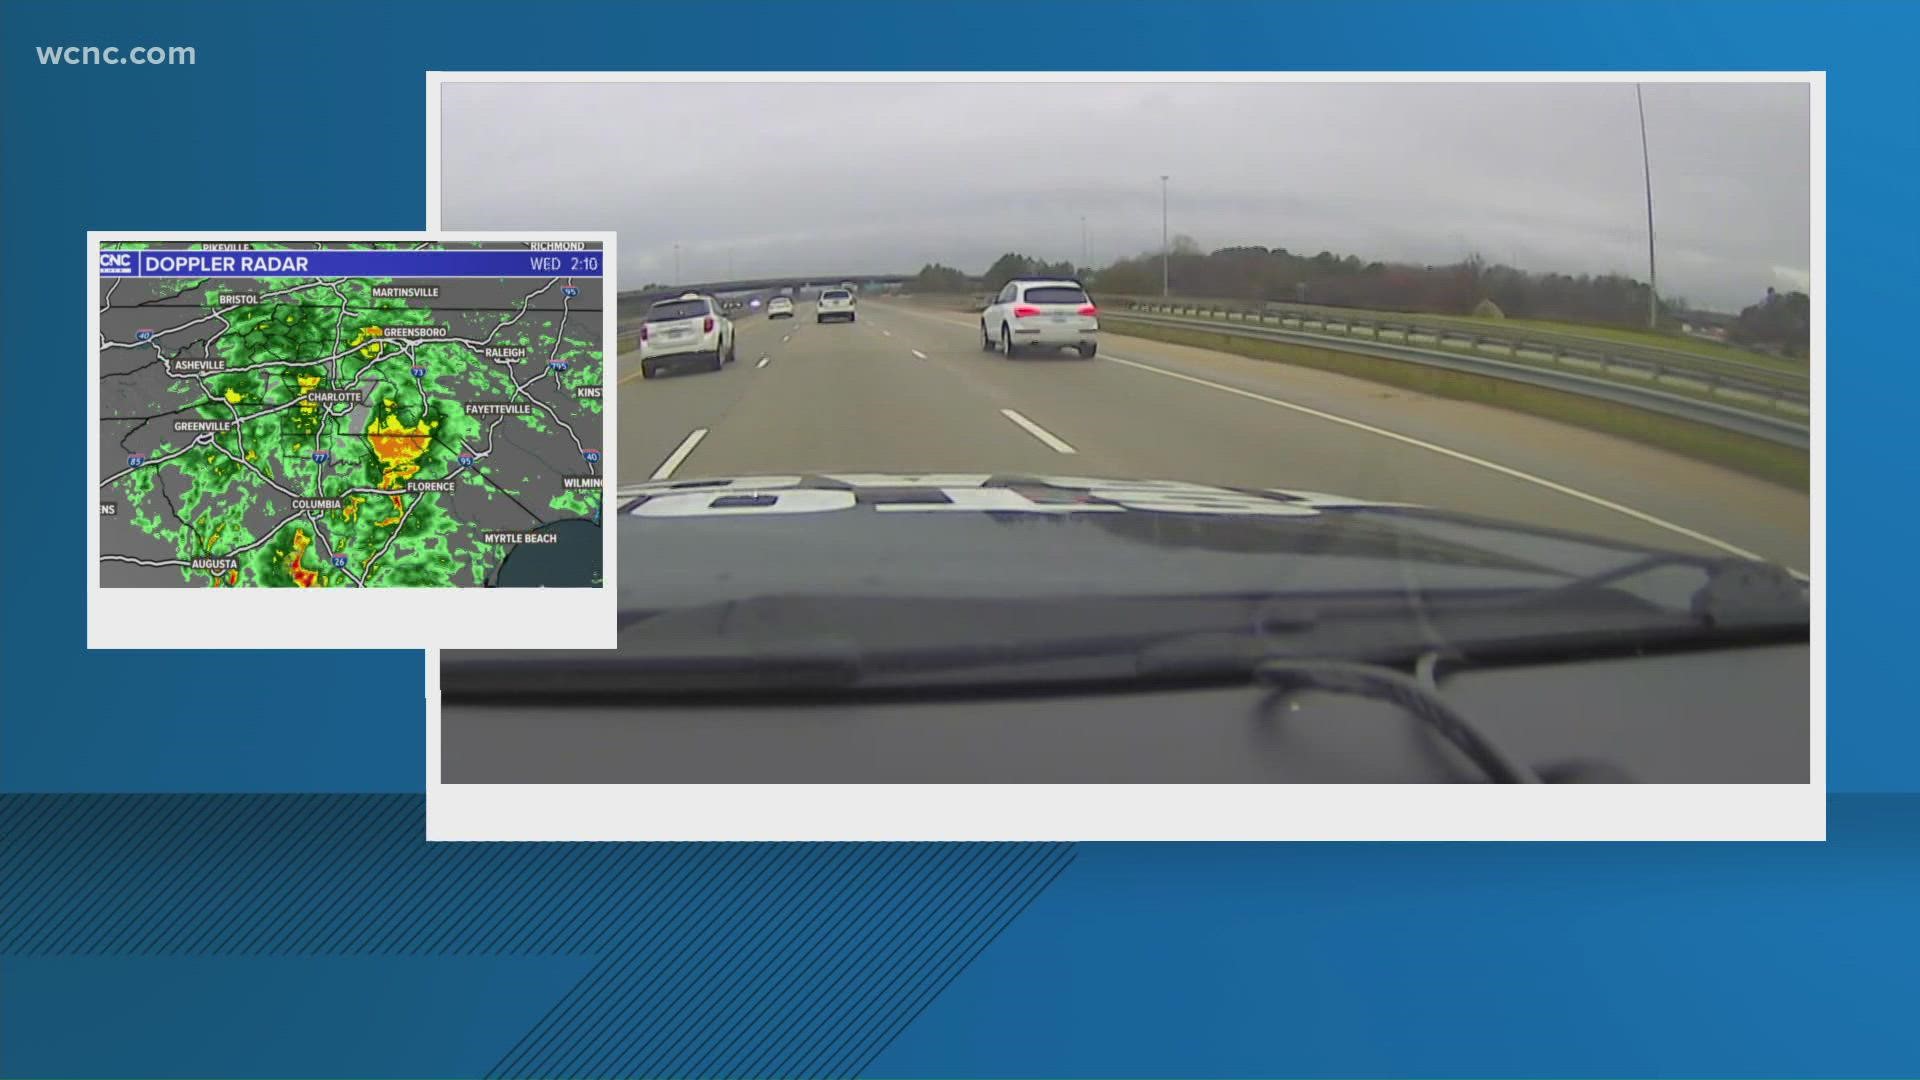 Kendall Morris is in the Chevy Storm Tracker, monitoring the road conditions as bands of rain move through the Carolinas.